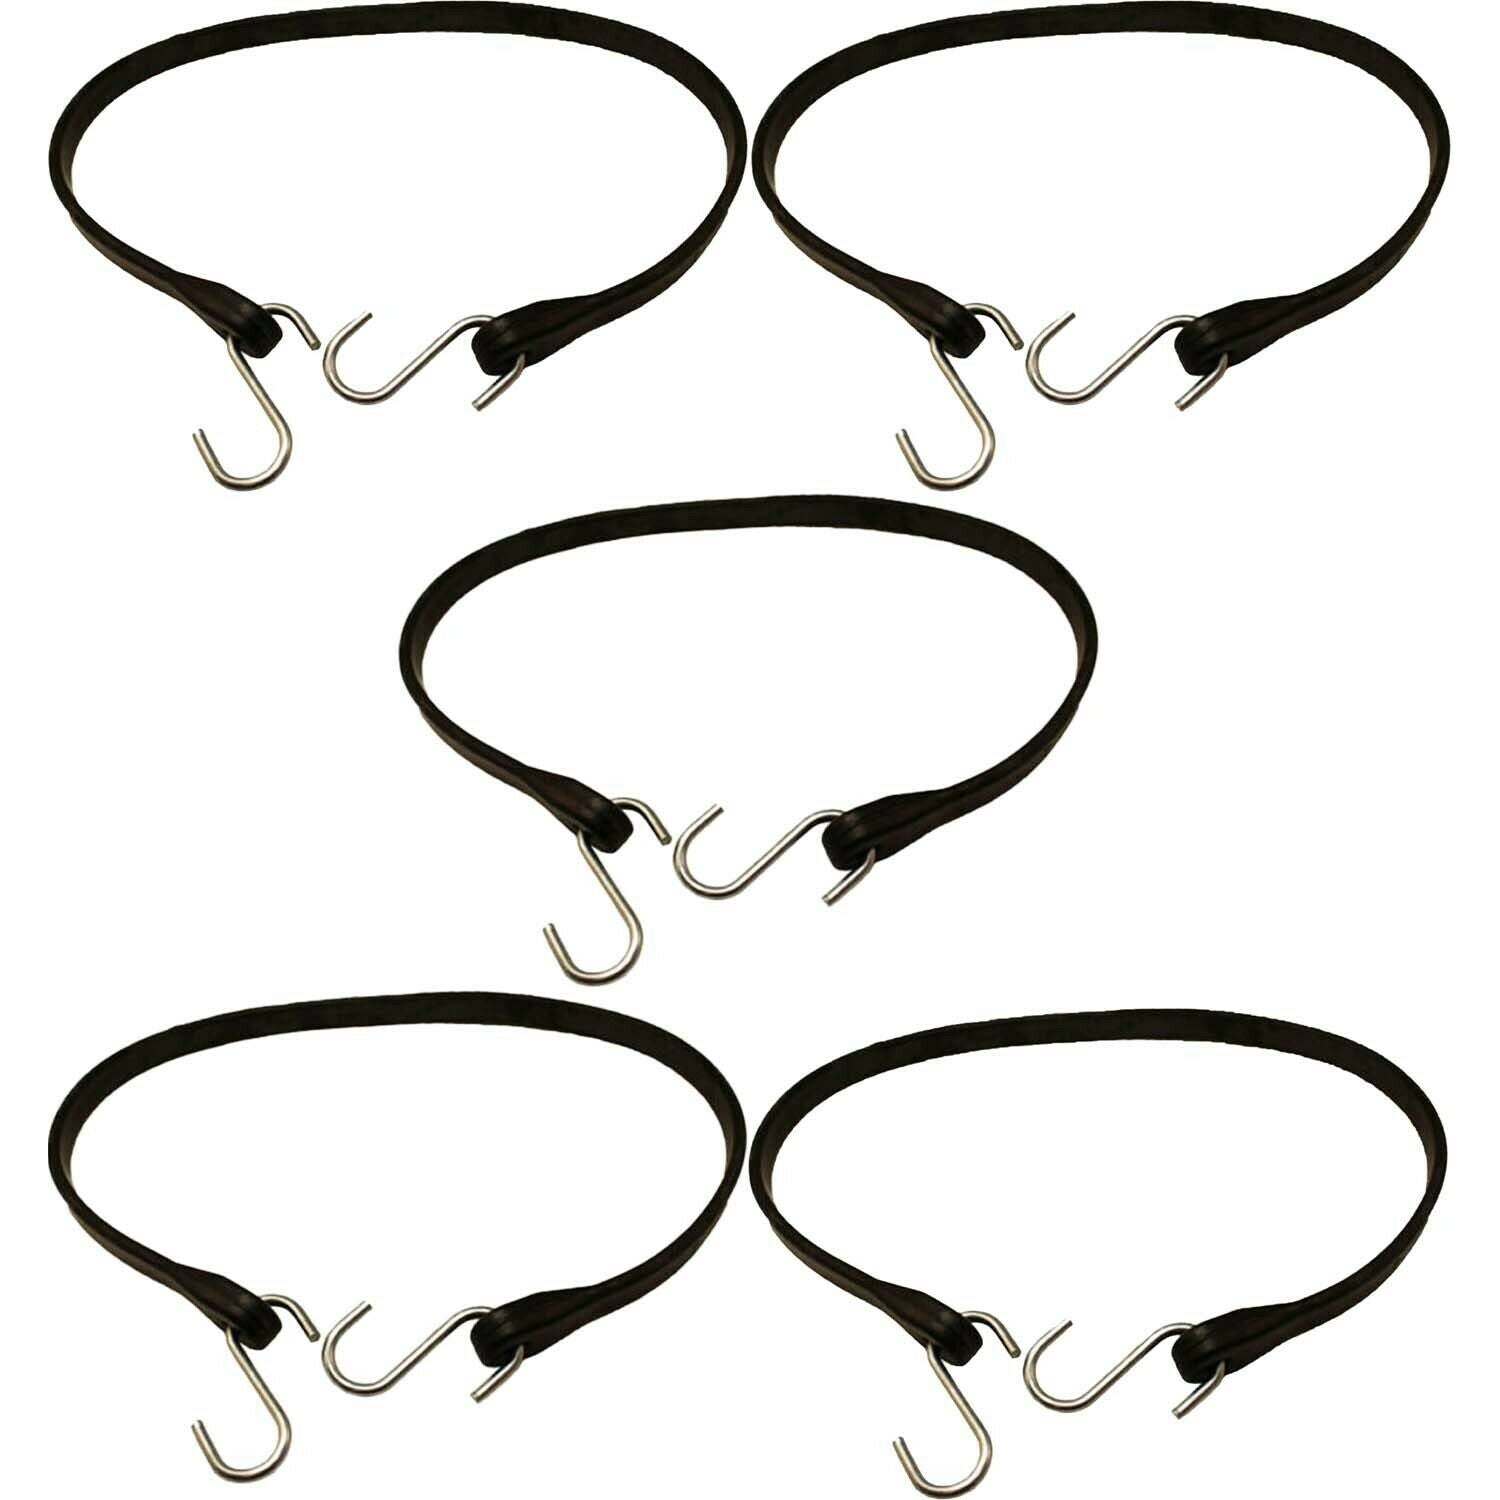 Peerless CC8409 9" EPDM Rubber Bungee Tarp Strap with Hooks Pack of 5